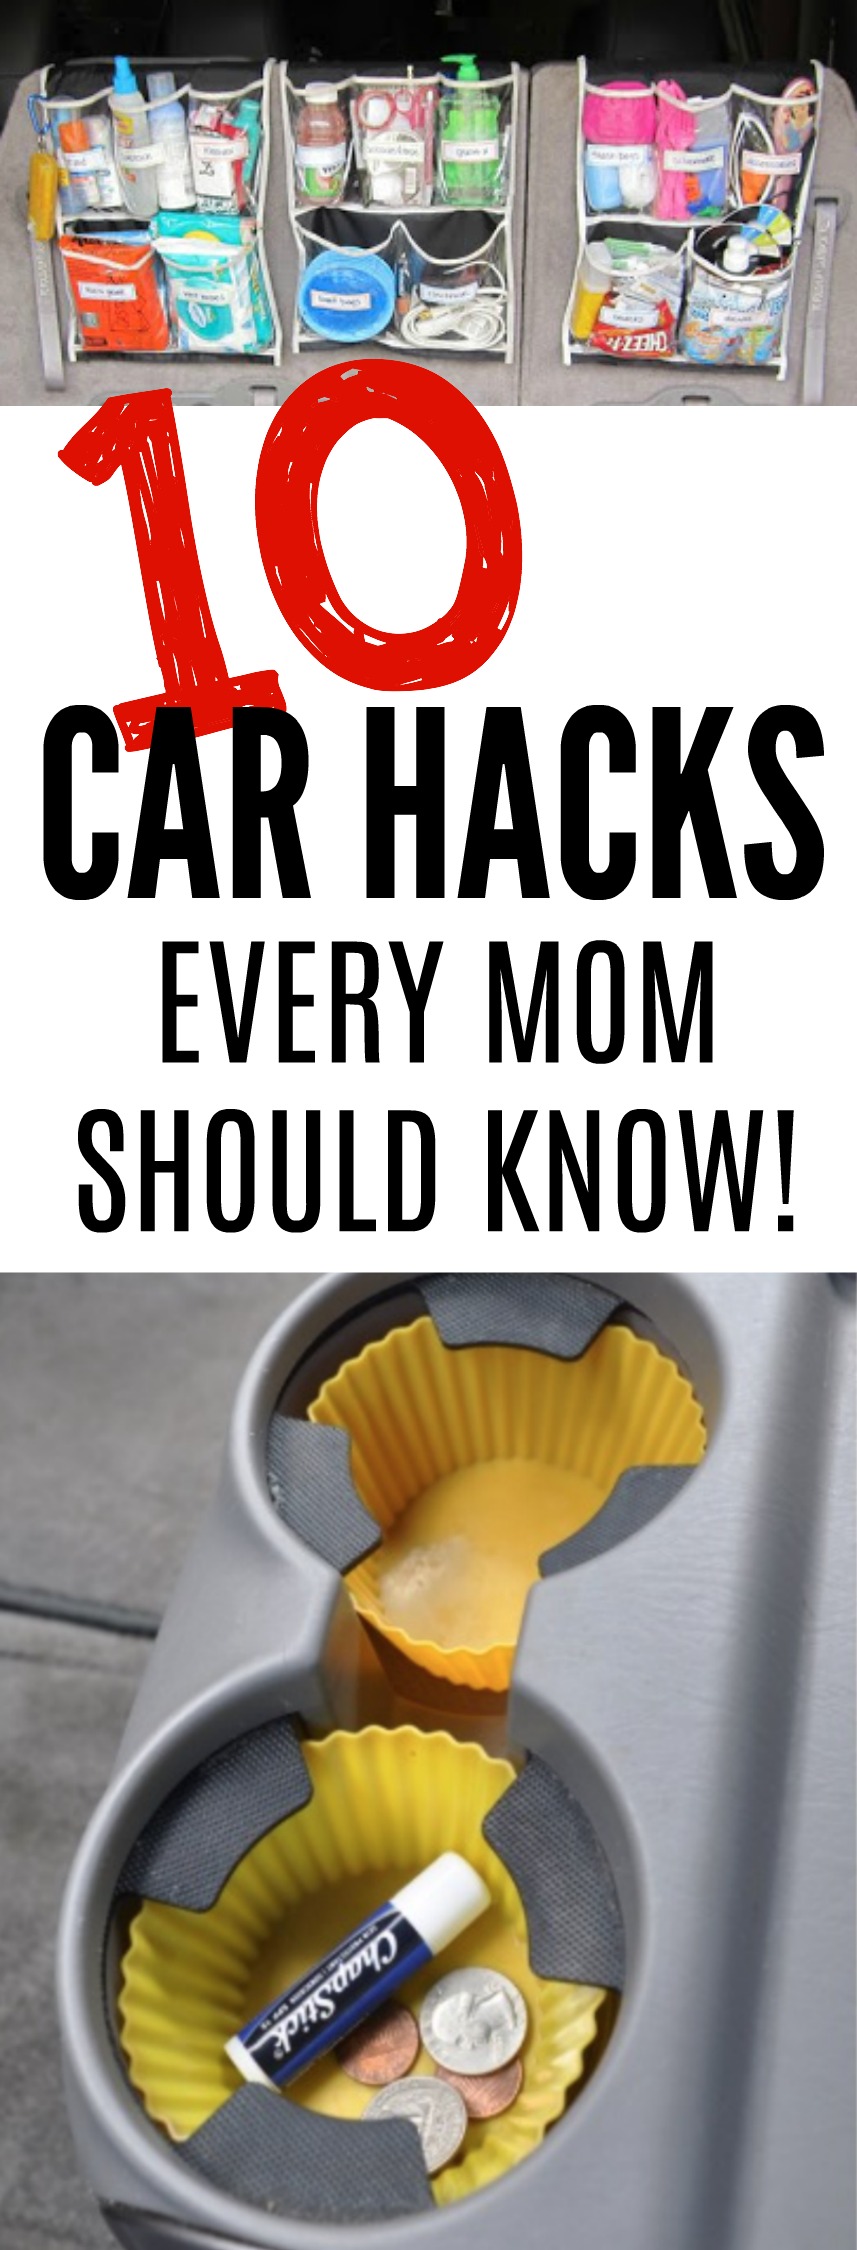 10 Car Hacks Every Mom Should Know! Tips to Organize Your Car in No Time!